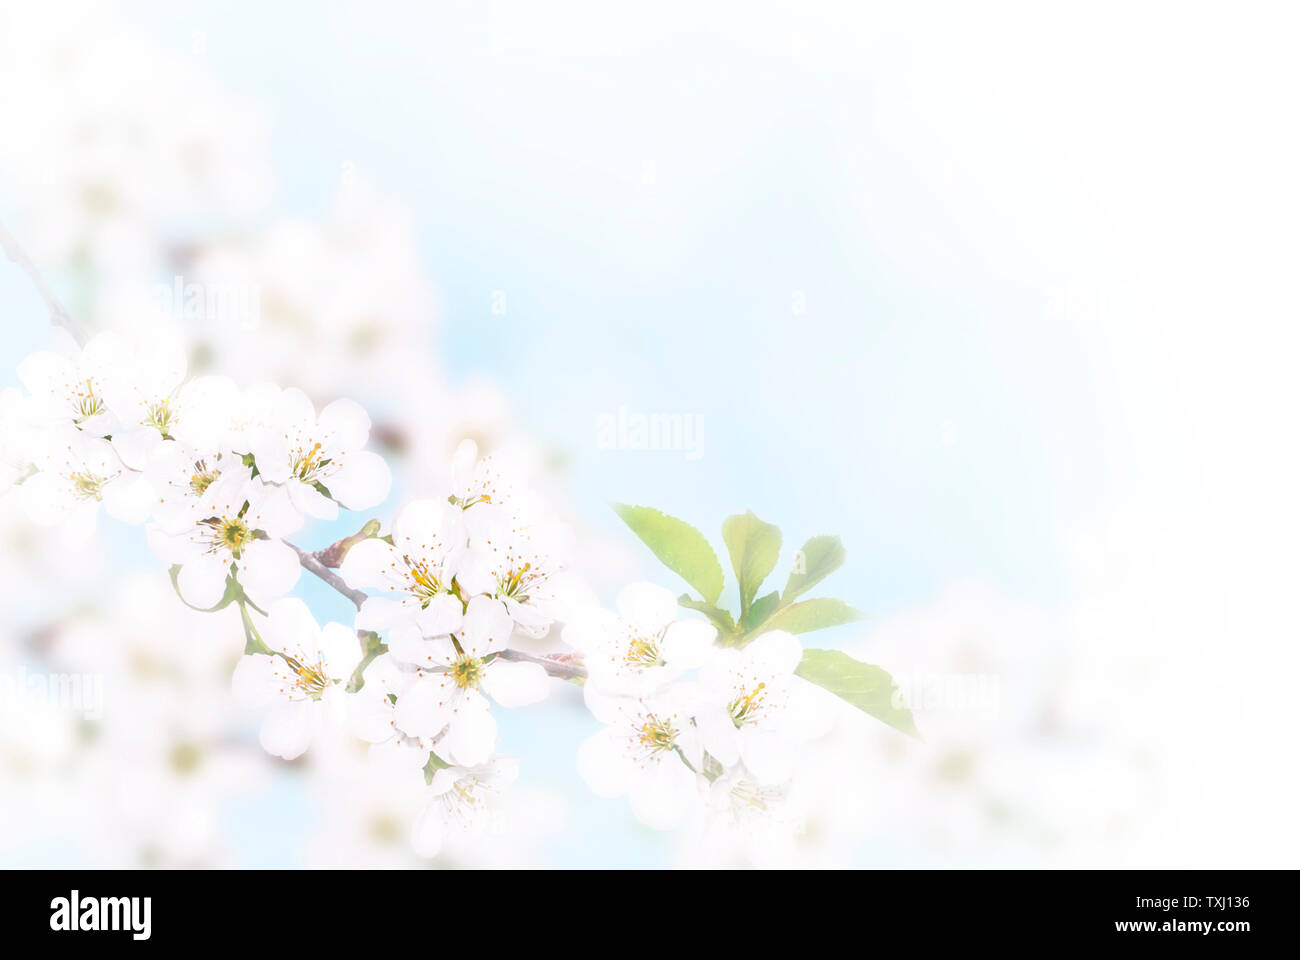 Branch of white spring blossom over blue sunny bokeh background close-up. Stock Photo